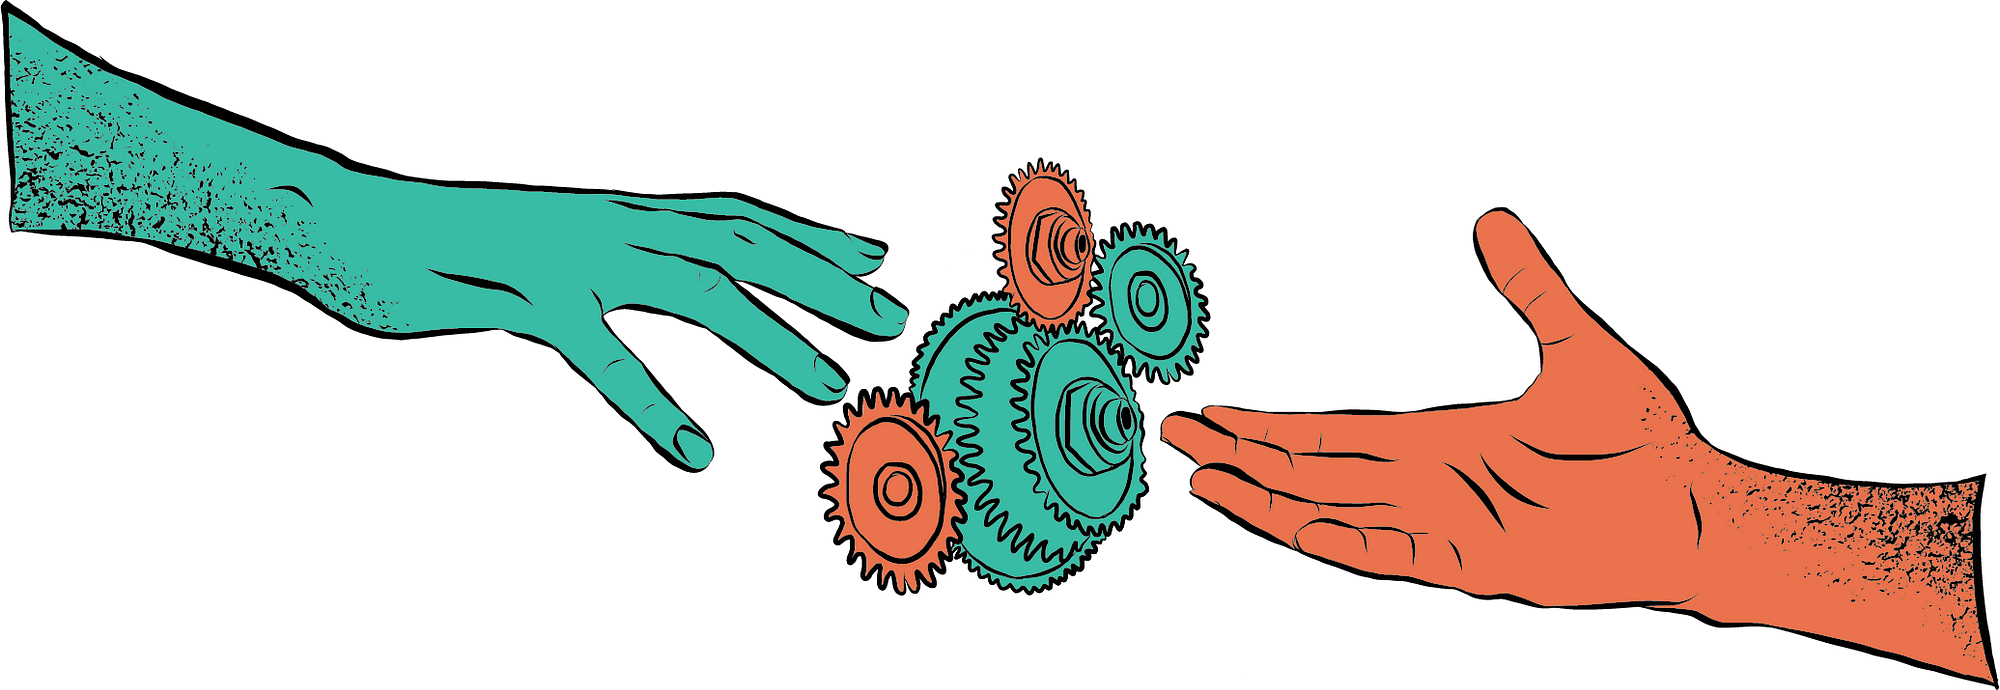 Two hands reaching for each other; one is green and one is orange. In the space between the fingers reaching for each other are four gears that fit together.